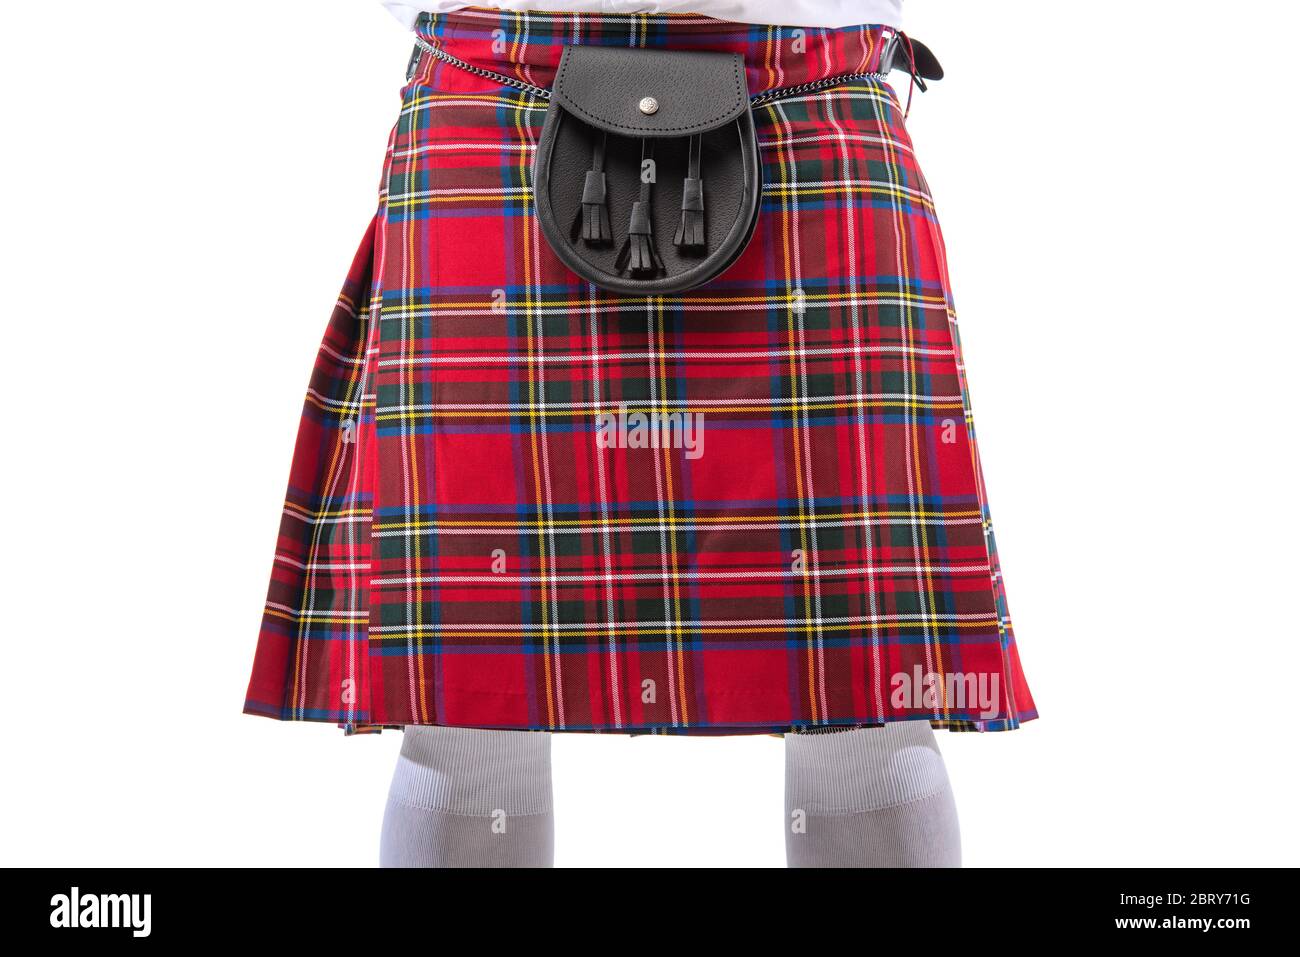 Why do kilts have a little bag? - Quora